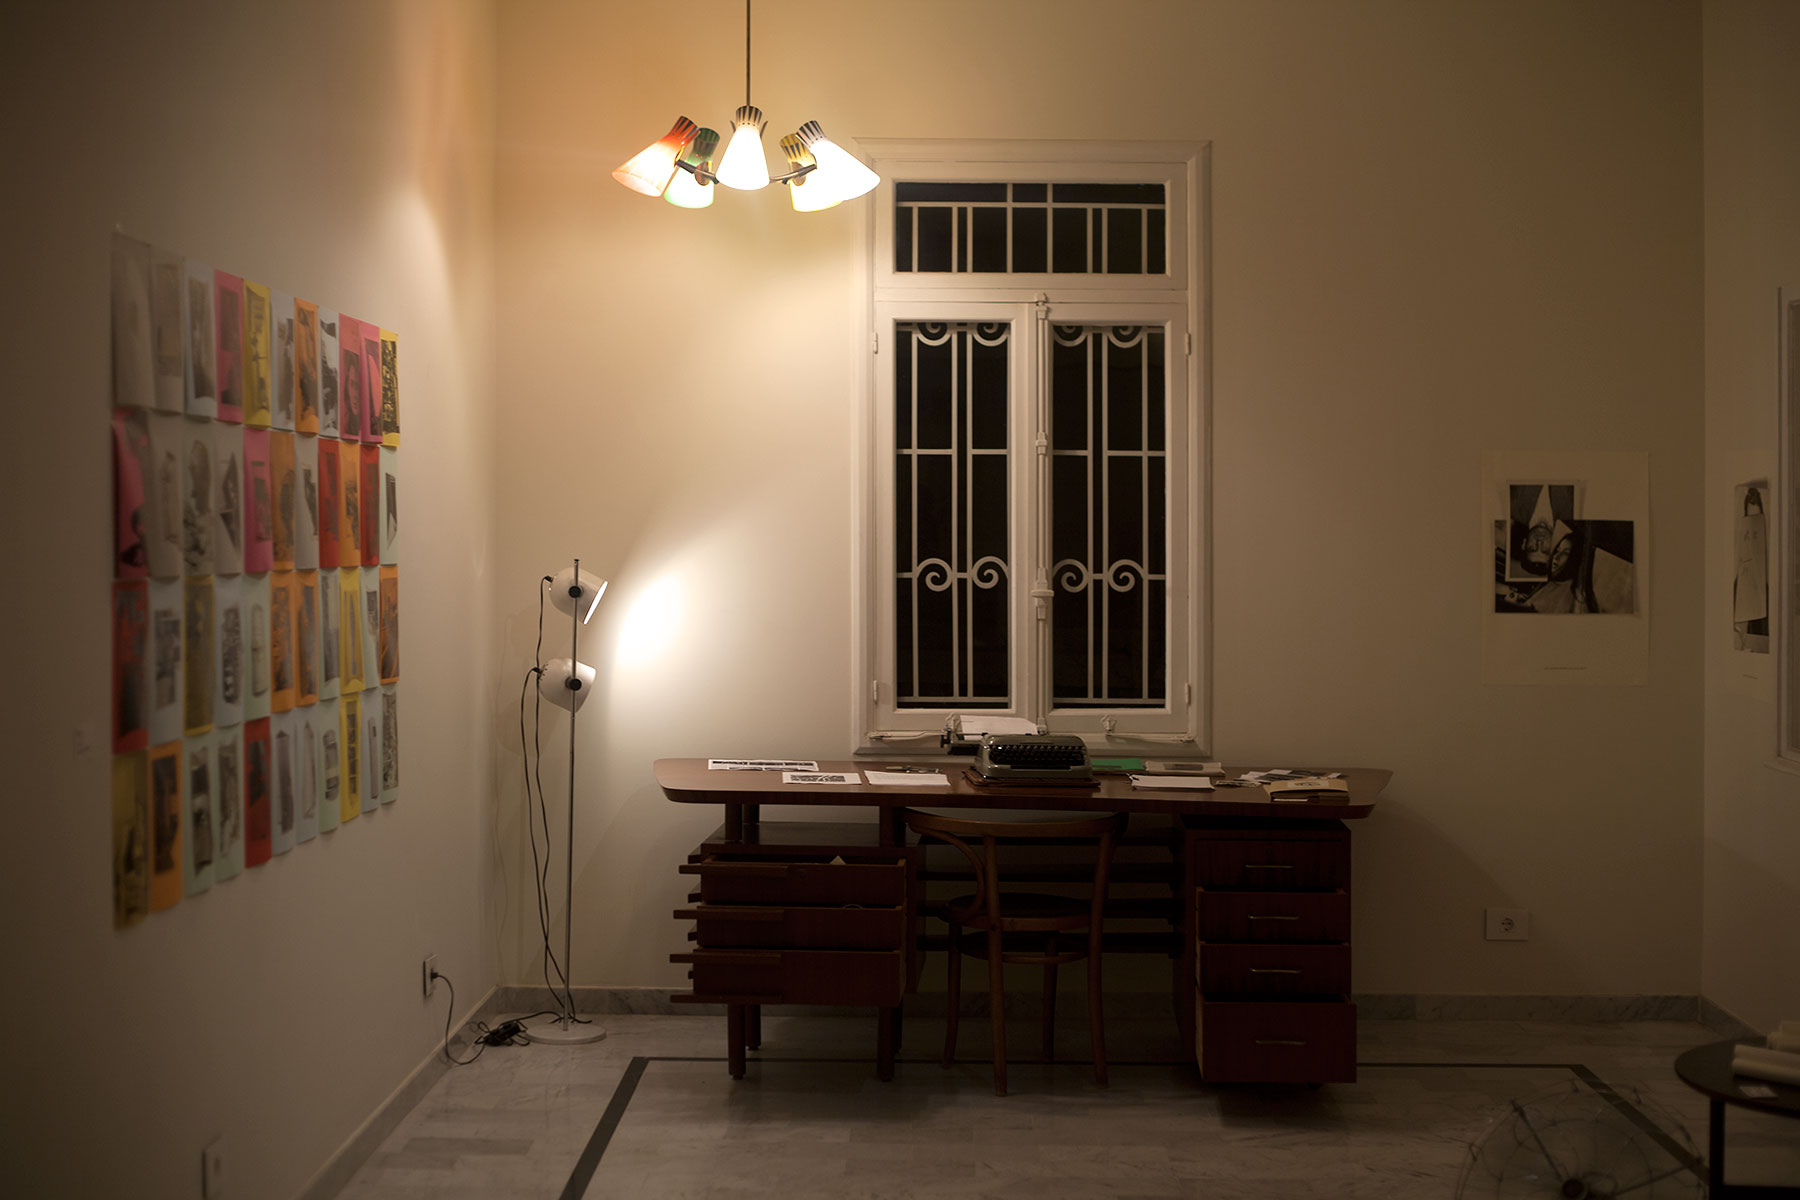 paula roush: Torn folded curled (Today), exhibition view, Makan/PlanBEY, Beirut